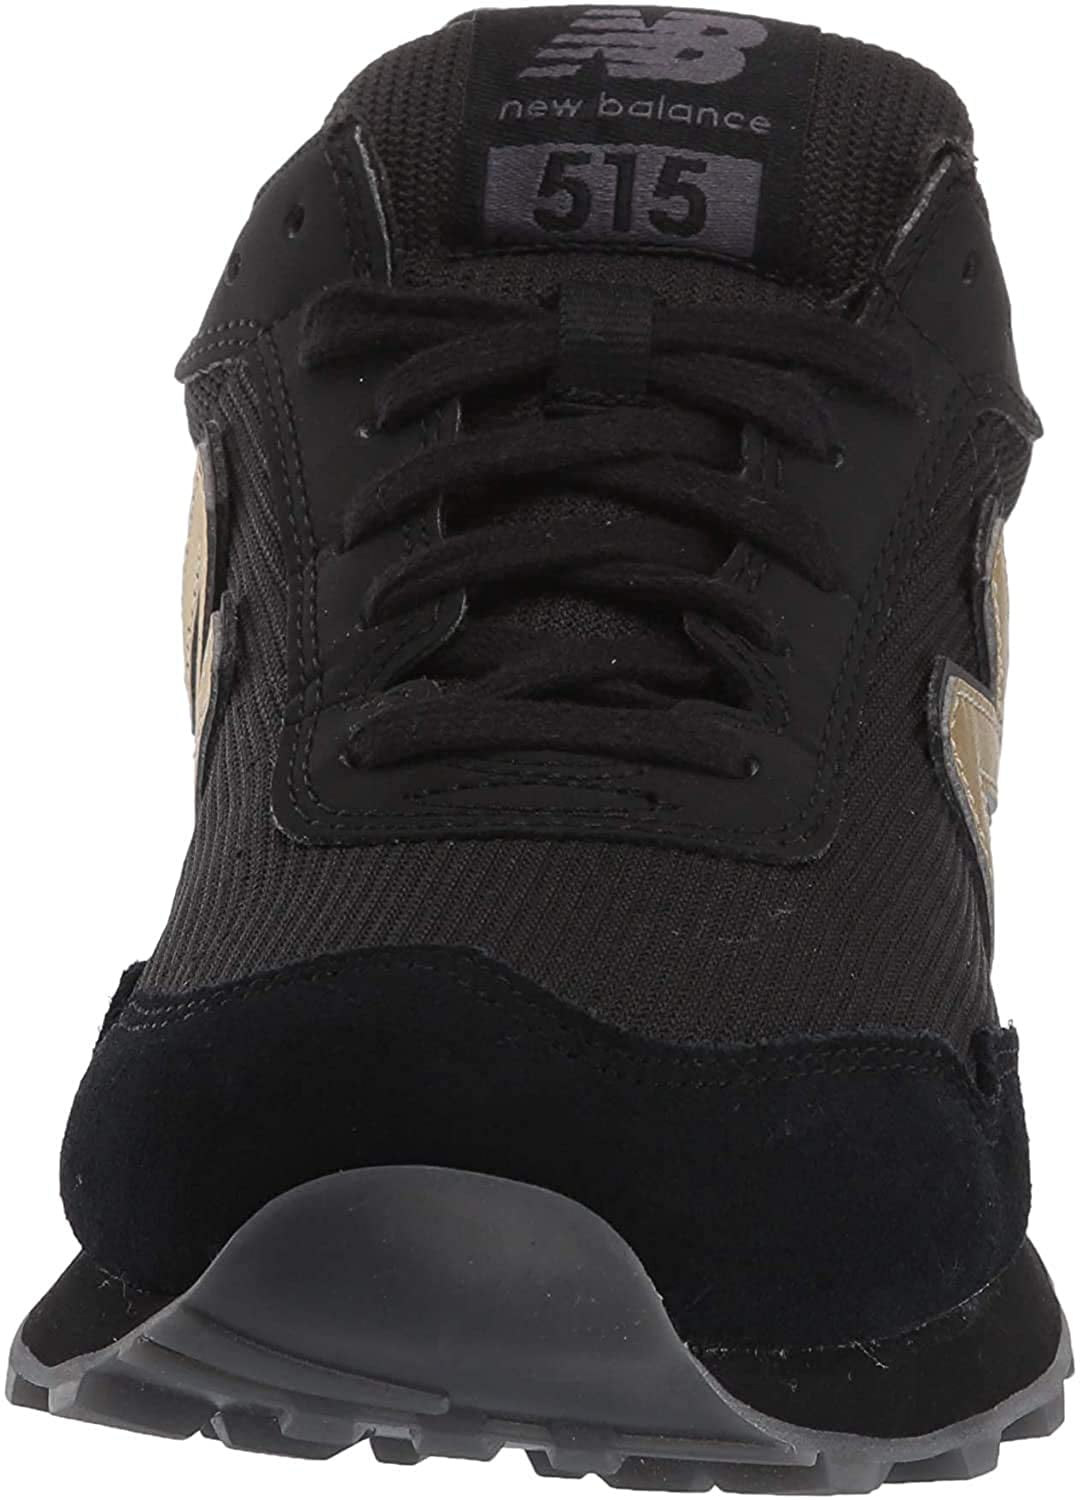 new balance black and gold sneakers